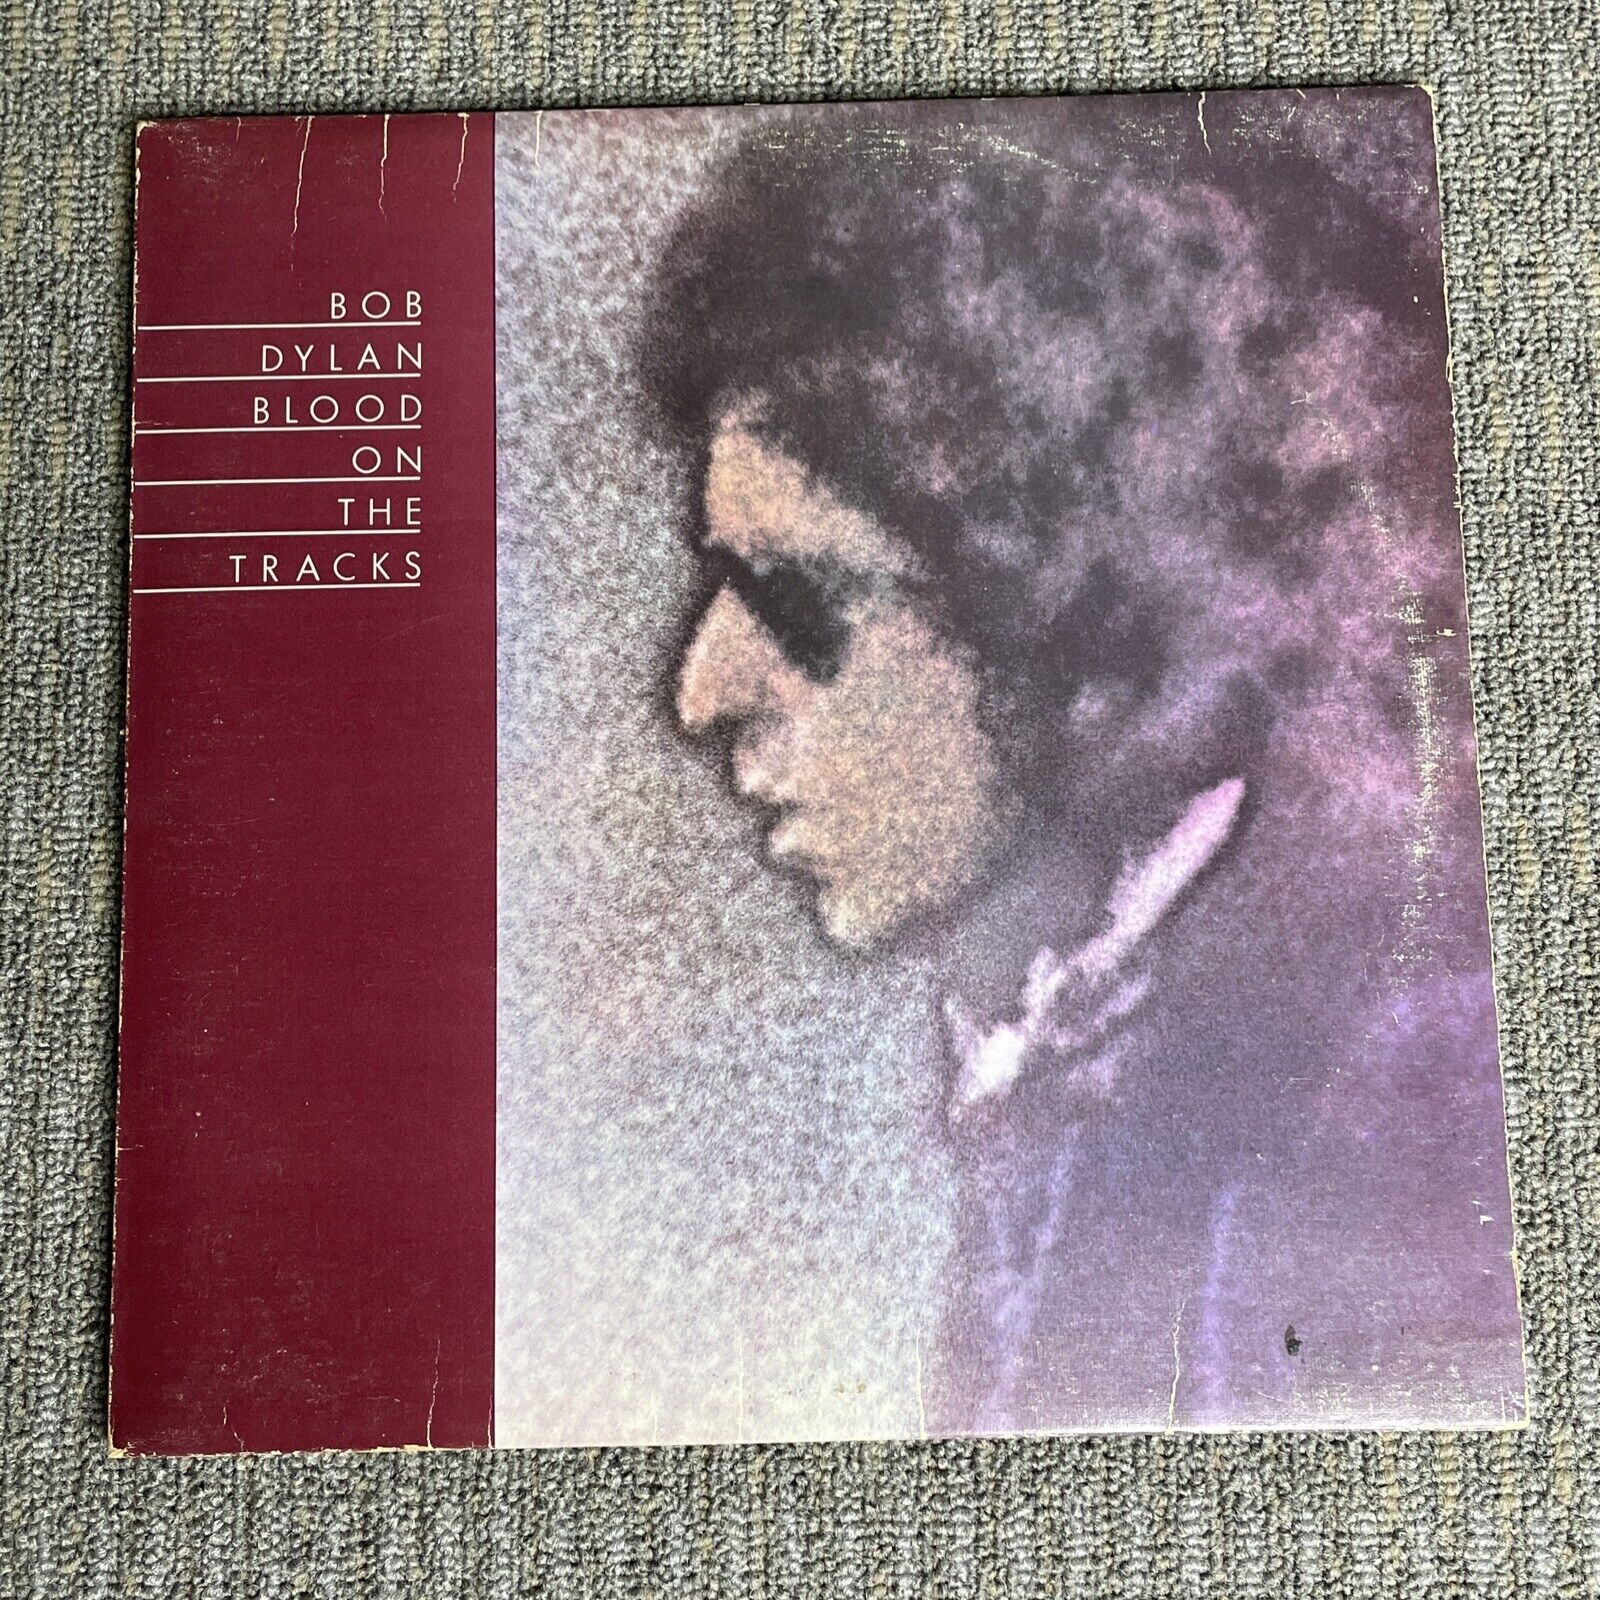 Bob Dylan, Blood On The Tracks (Vinyl Record, 12", 33 RPM, 1974) Canada Import